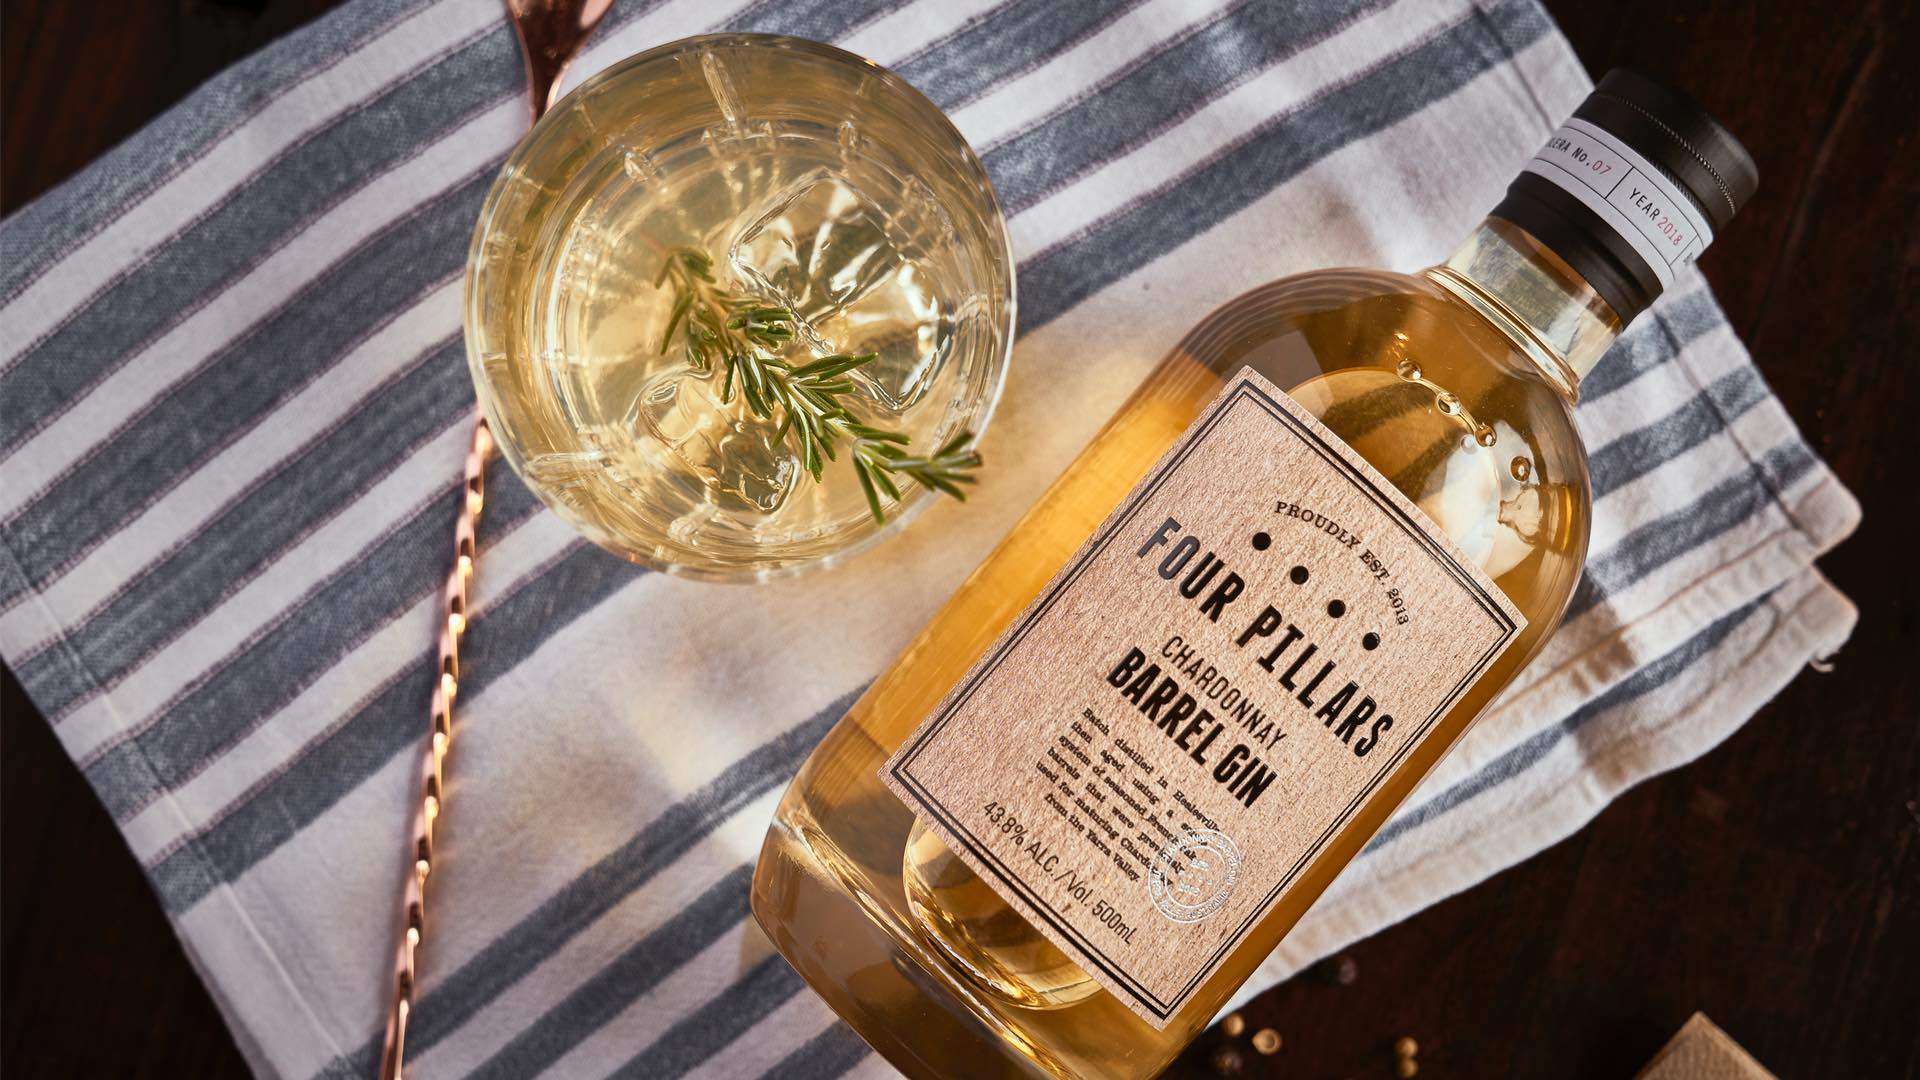 Four Pillars Has Launched a New Barrel-Aged Gin to Add to Your Gin Shrine